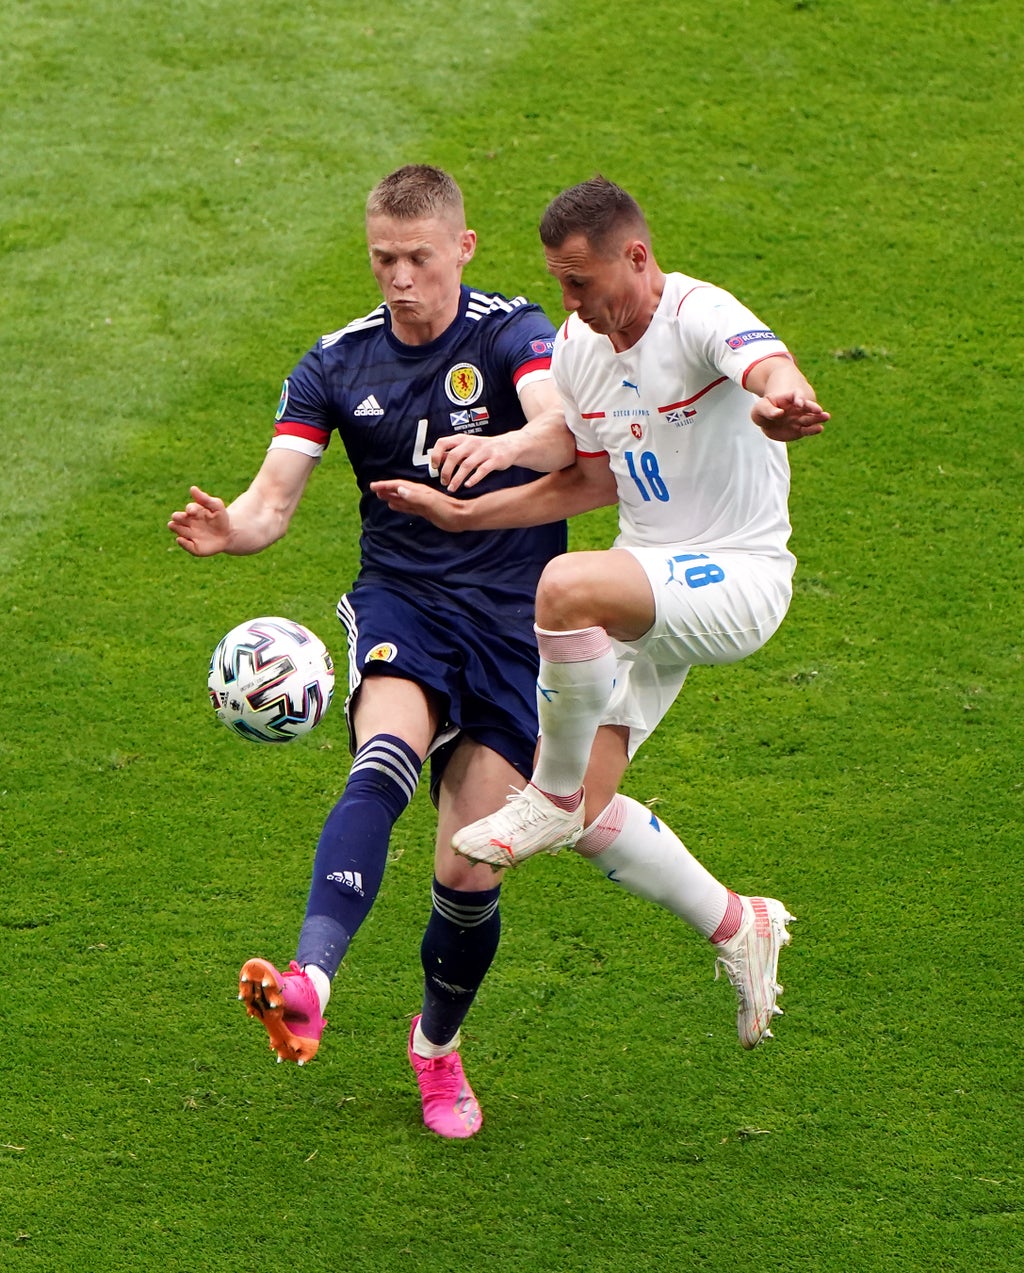 Scotland cannot afford to lose Wembley clash with England, says Scott McTominay